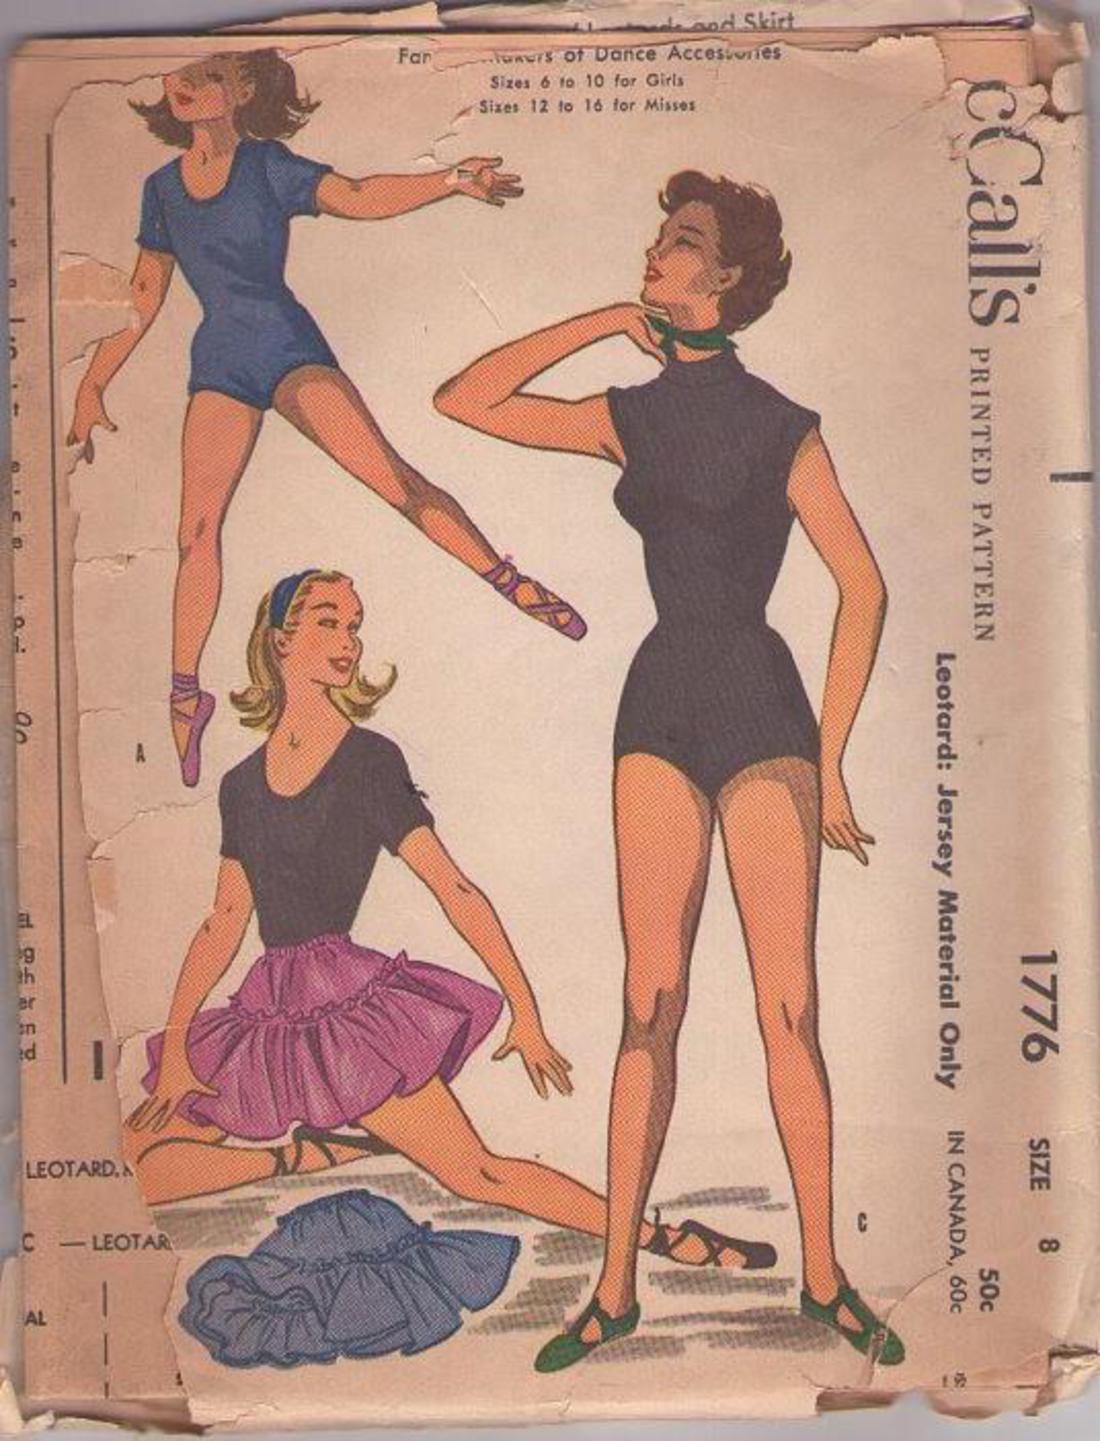 MOMSPatterns Vintage Sewing Patterns - McCall's 1776 Vintage 50's Sewing  Pattern Girls' Ballet Dance or Yoga High Cut Leg Leotard Approved by  Capezio and Tutu Crinoline Skirt Slip Cover Up Size 8